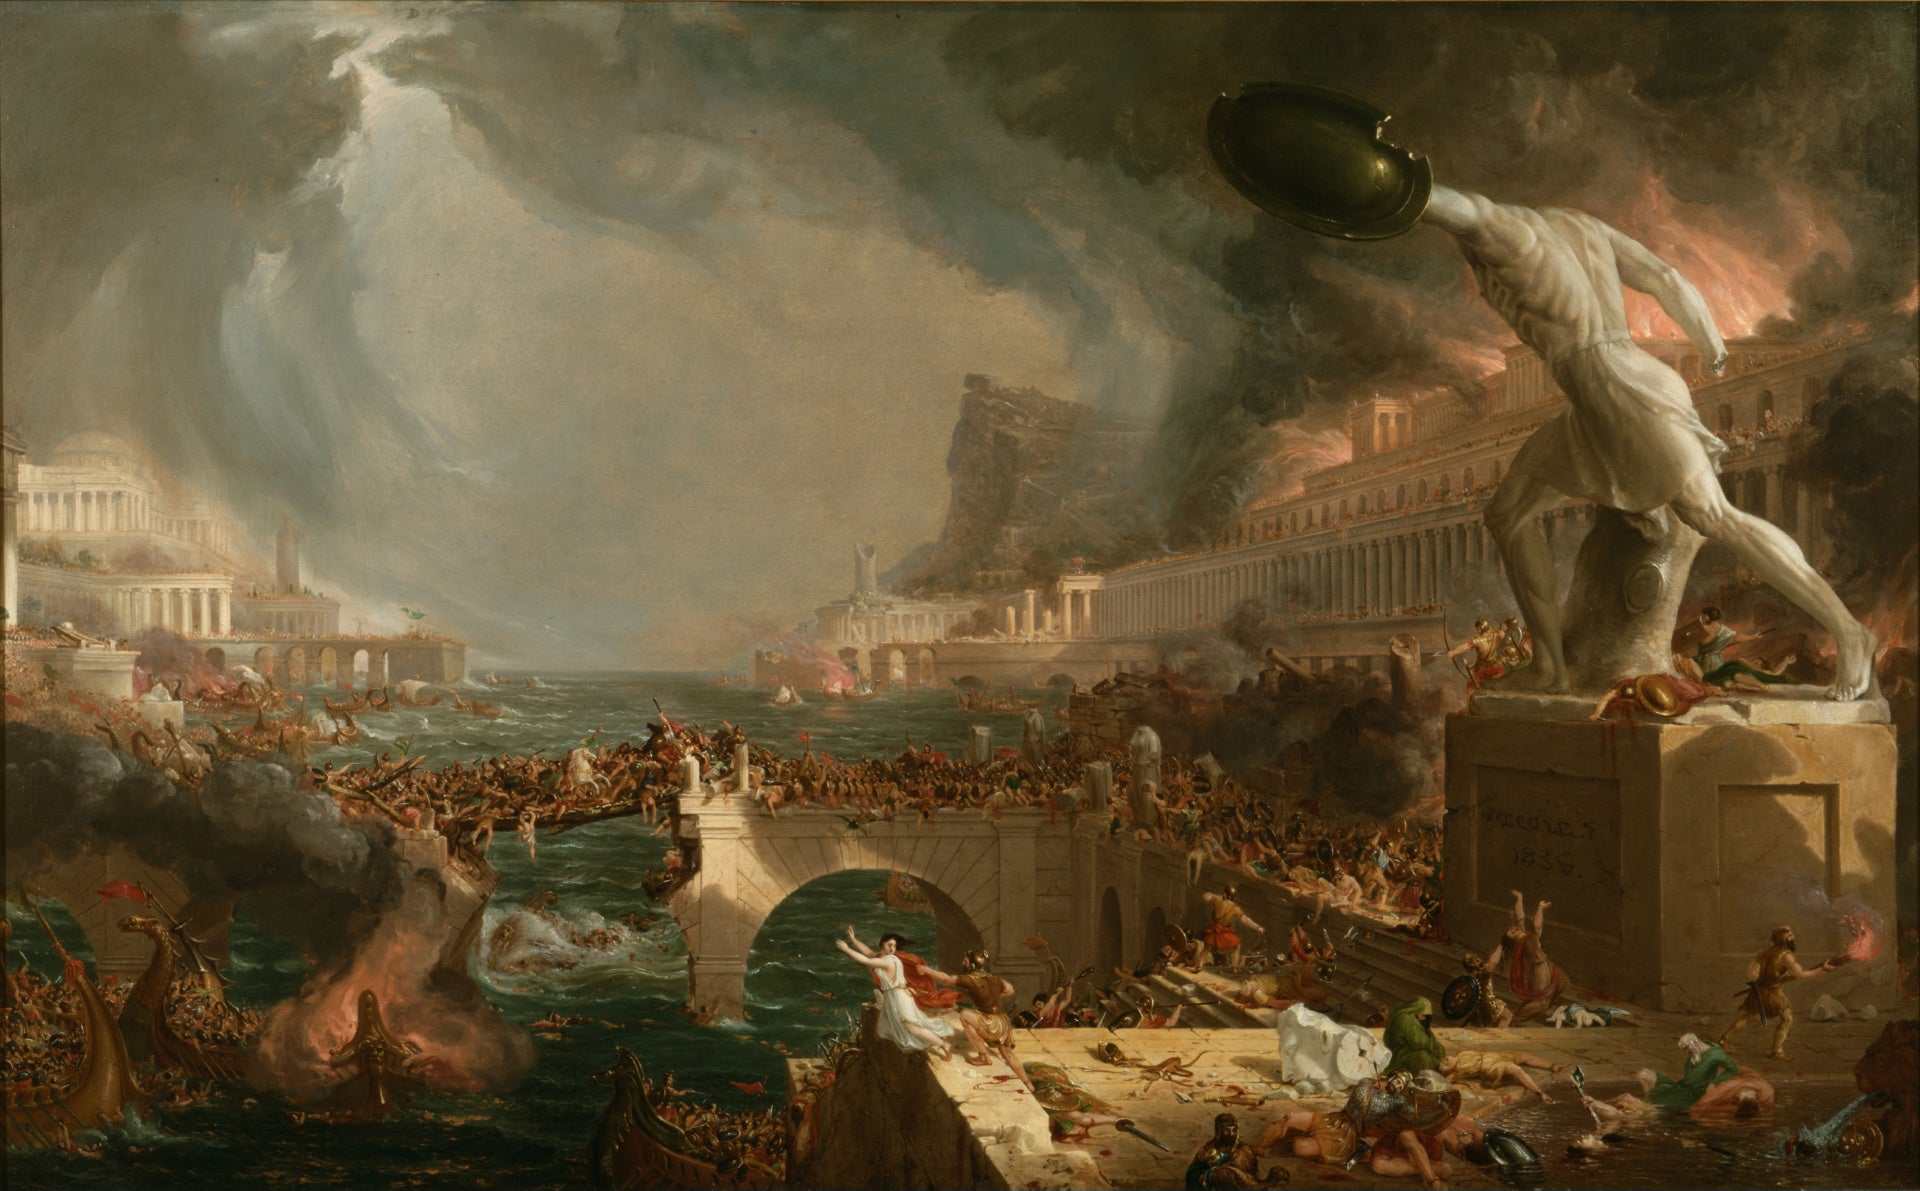 Thomas Cole's The Course of Empire